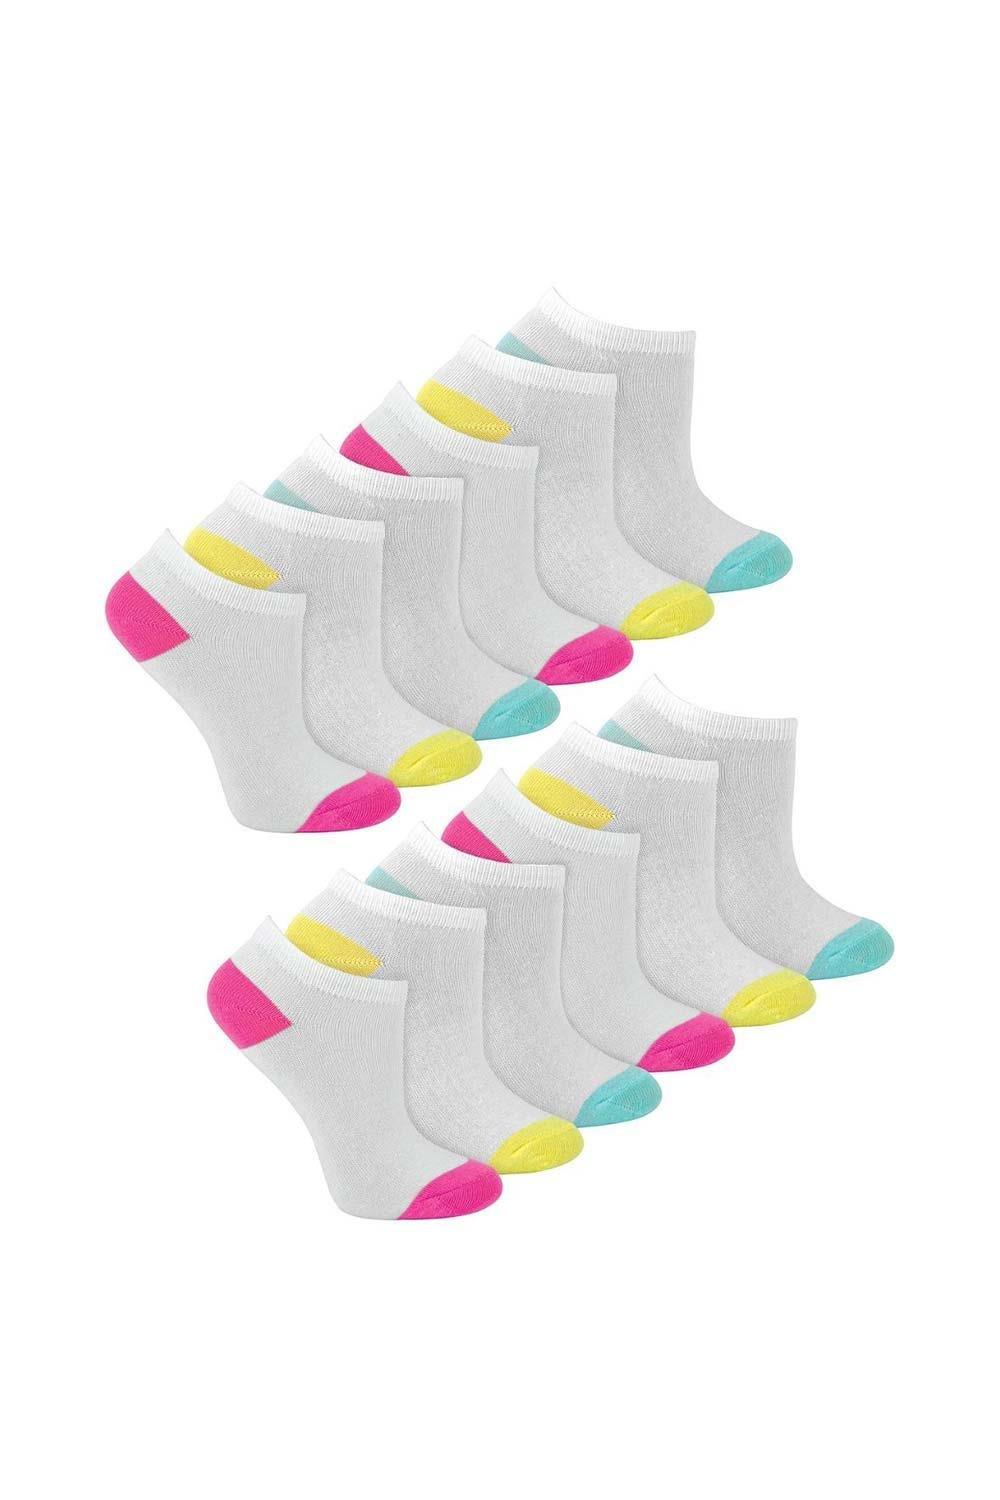 12 Pair Low Cut Trainer No Show Athletic Running Socks